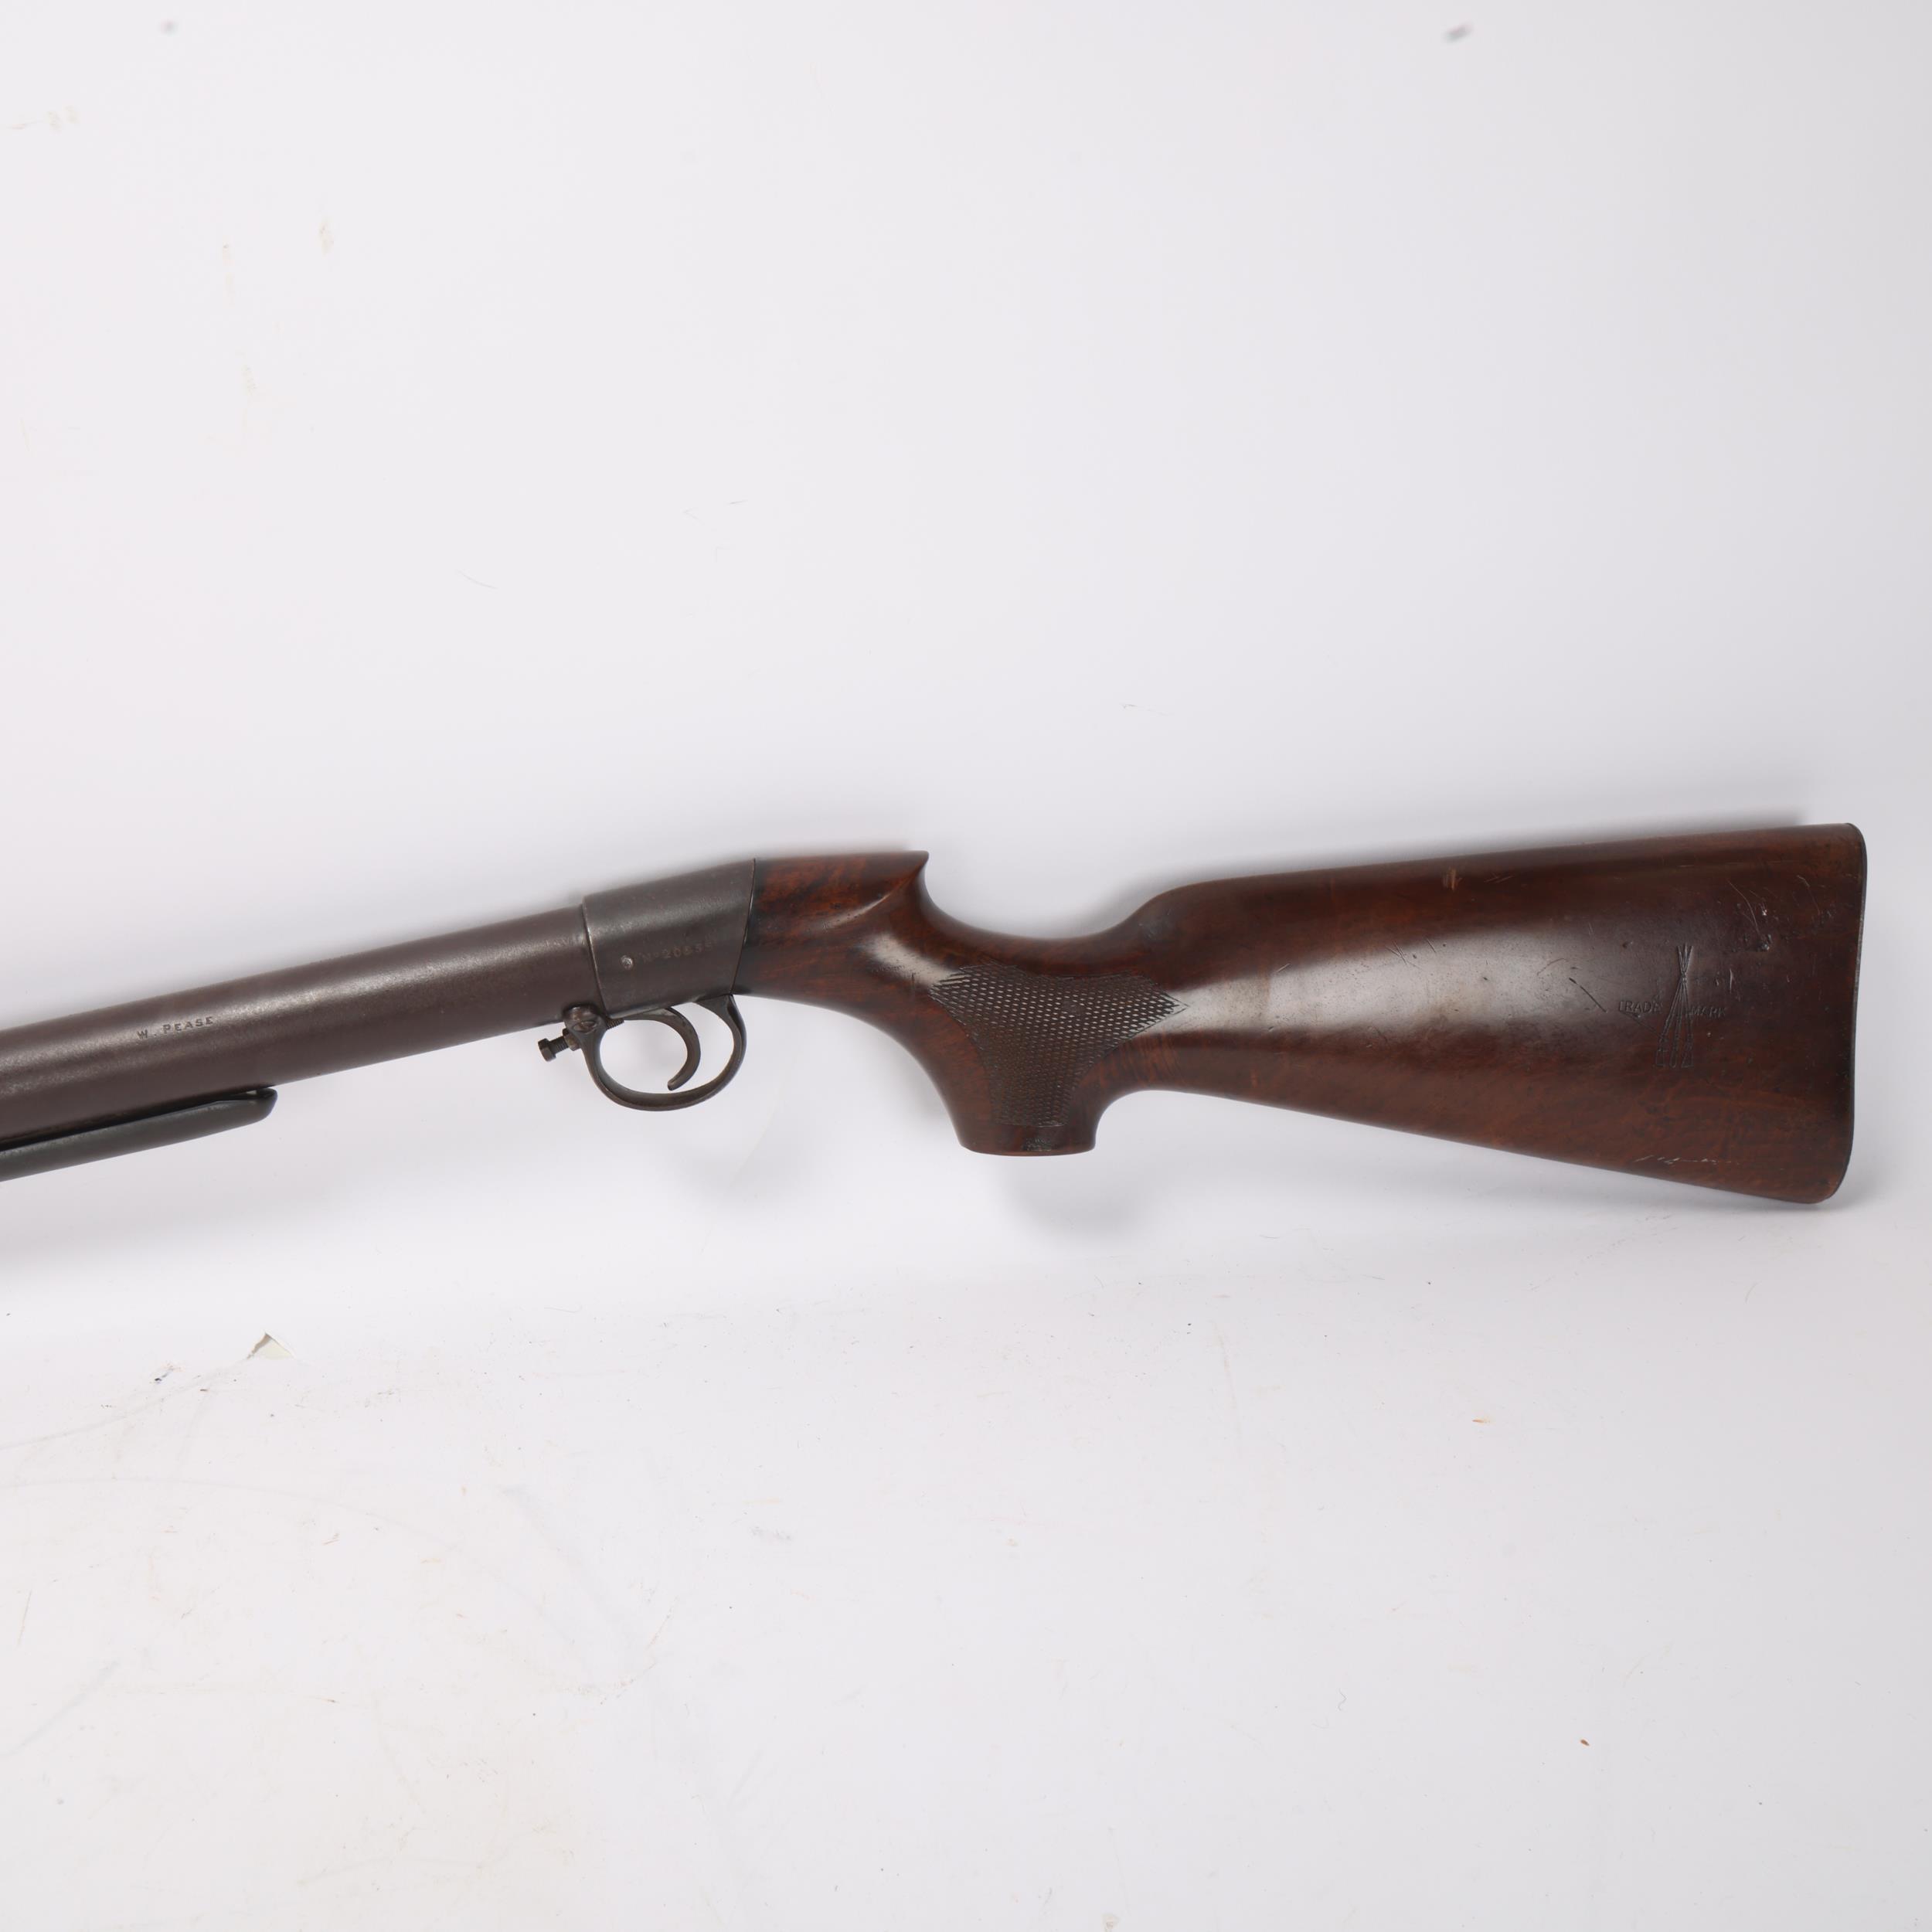 BSA .177 Improved Model D under-lever air rifle with chequered semi-pistol grip and adjustable - Image 2 of 3